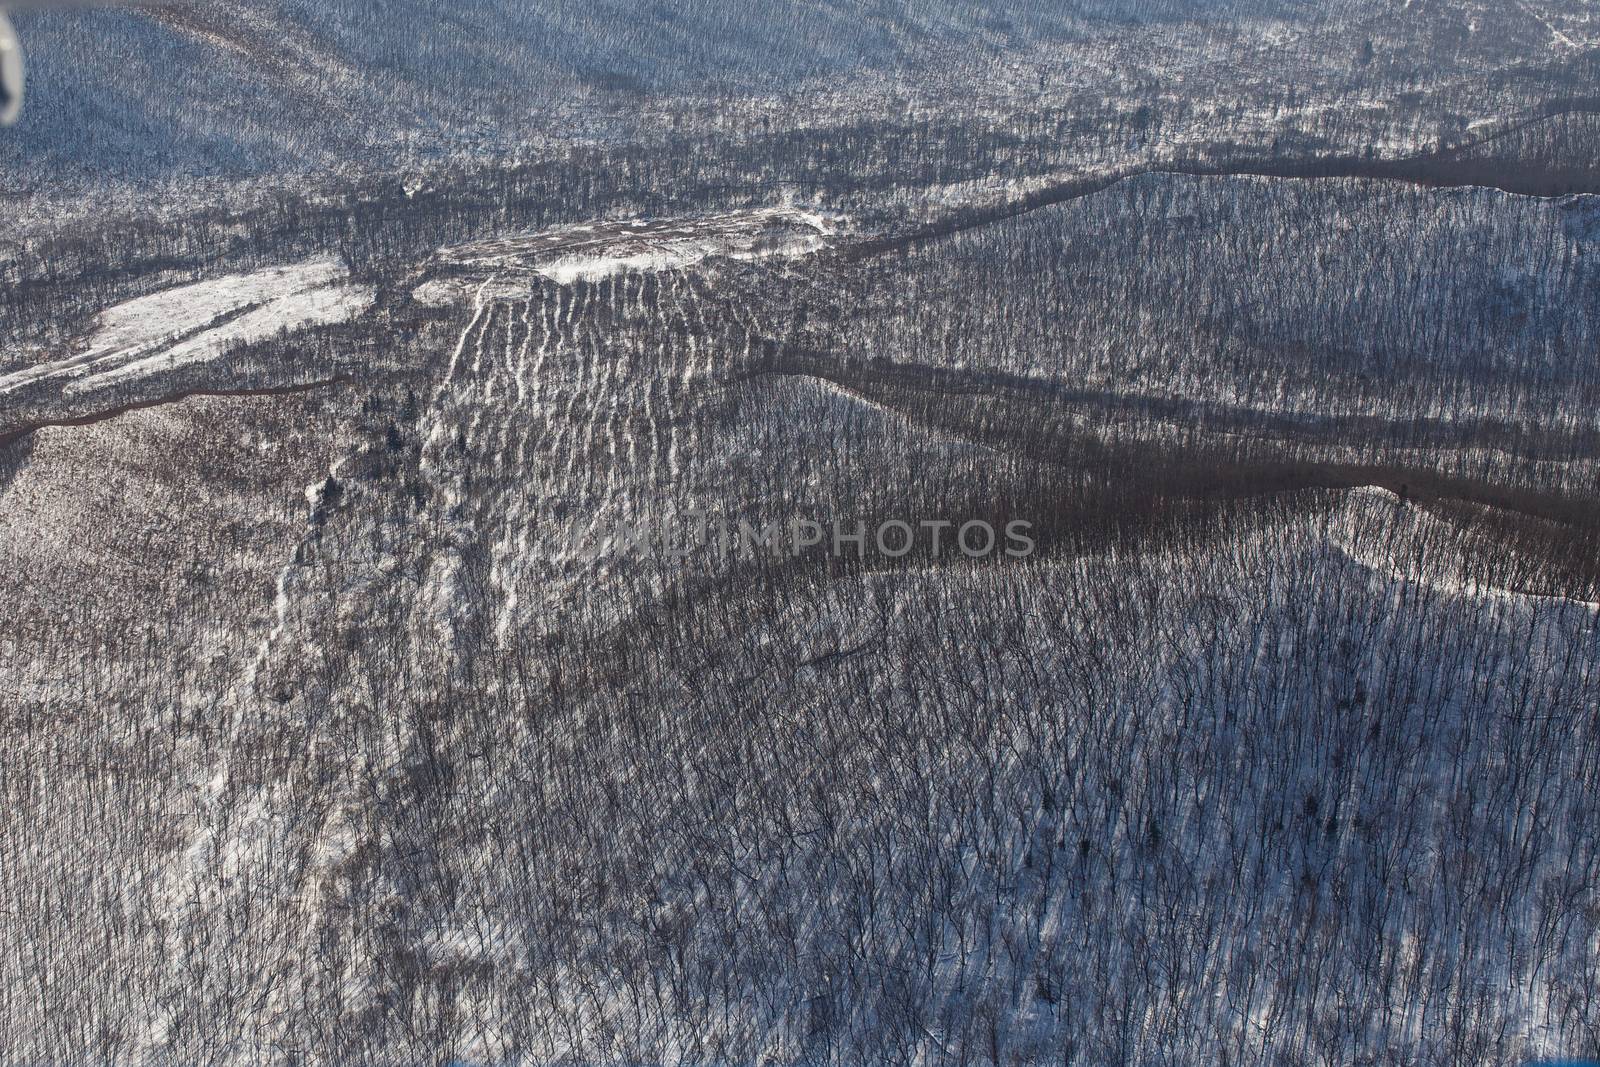 View from above. Winter coniferous forest, captured from a helicopter by PrimDiscovery